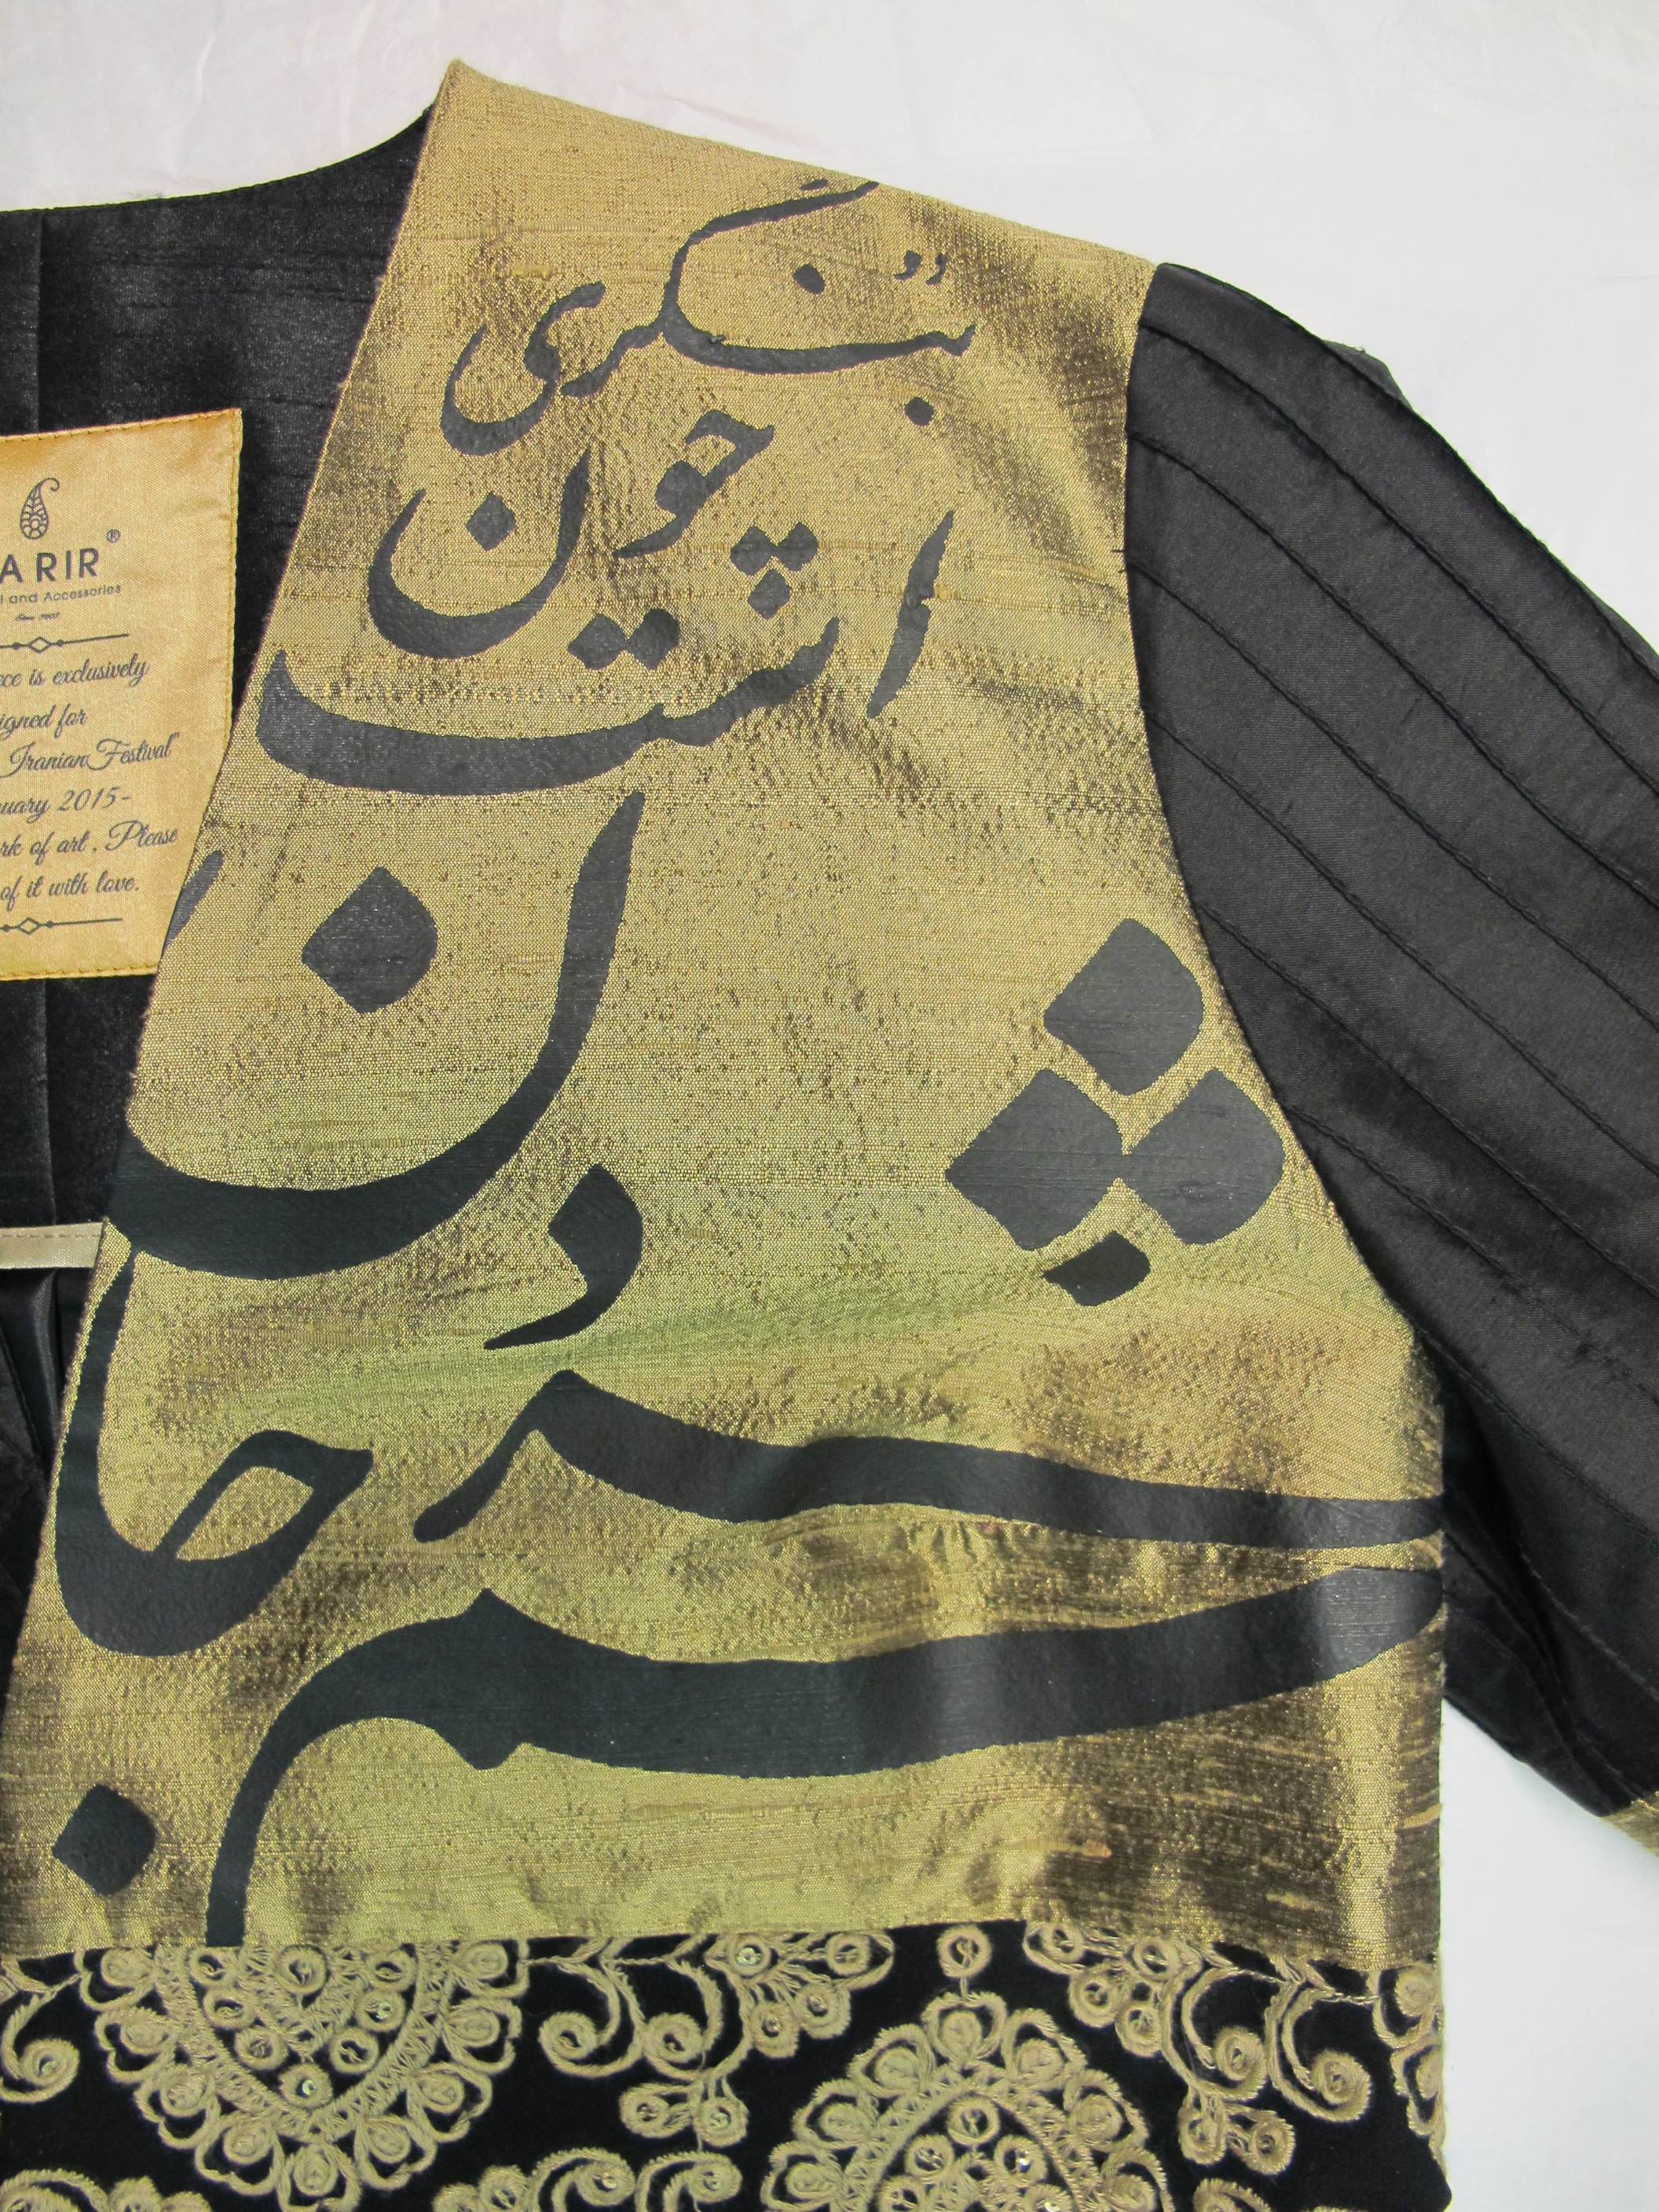 Black coat: detail of the screen-printed calligraphy on the left shoulder with words from a poem by Ferdowsi.